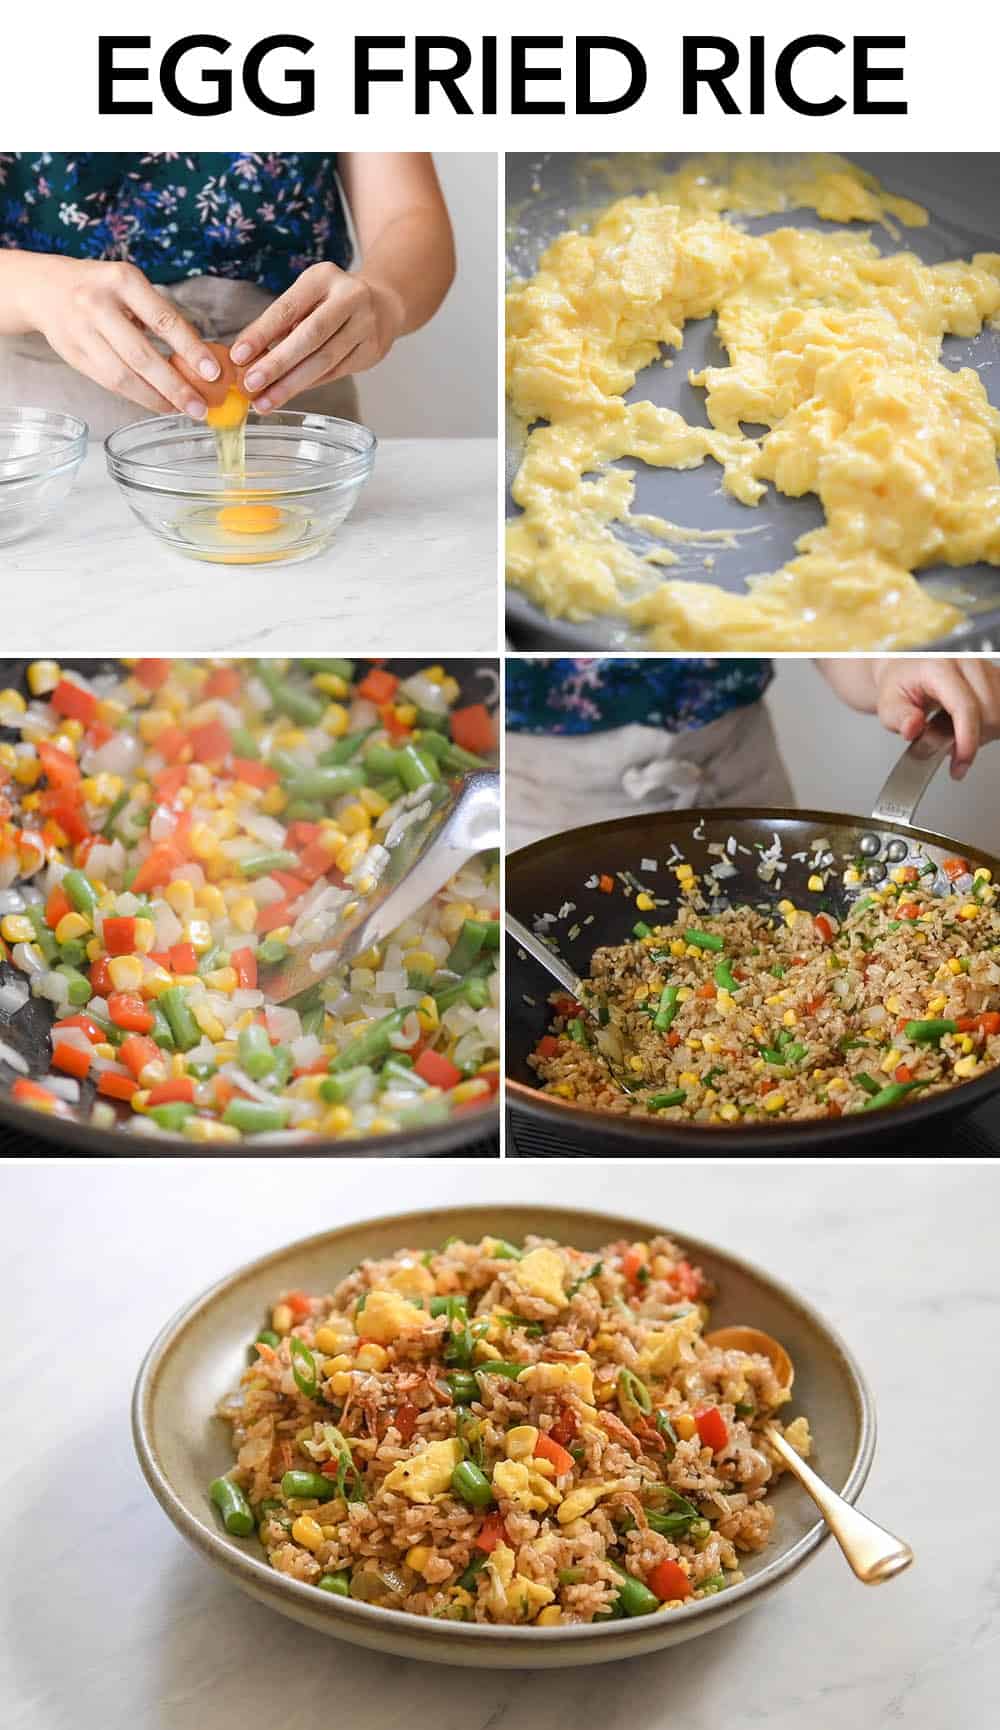 Egg Fried Rice - an easy meal ready in 20 minutes